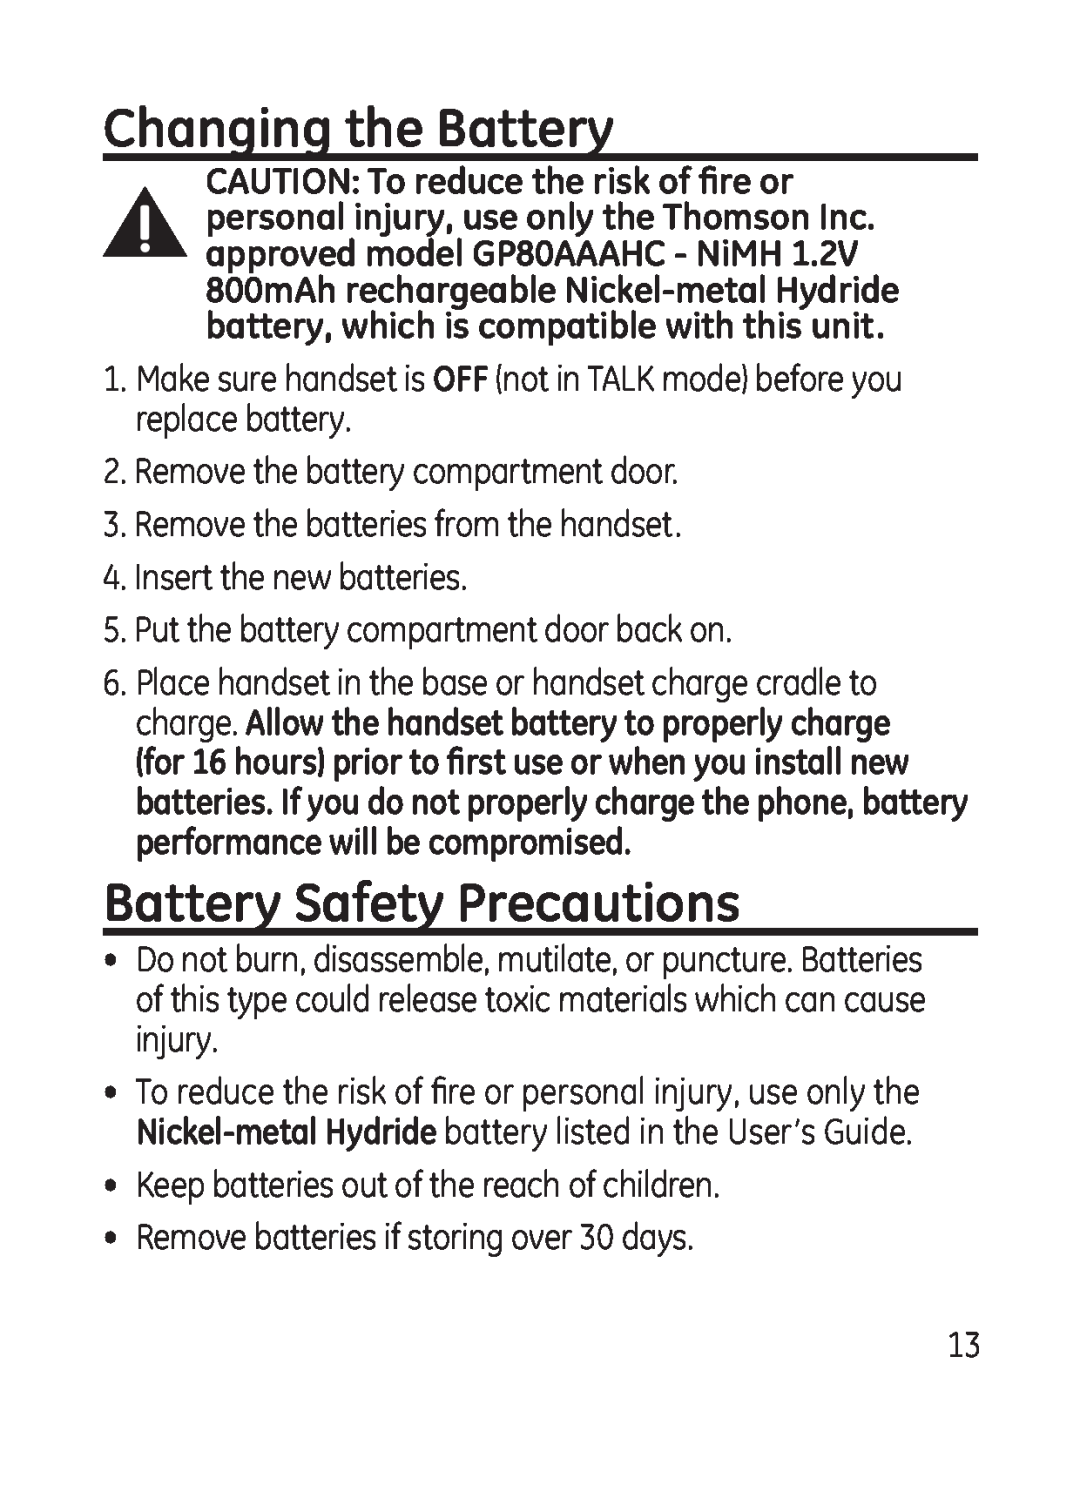 GE 28301 manual Changing the Battery, Battery Safety Precautions 